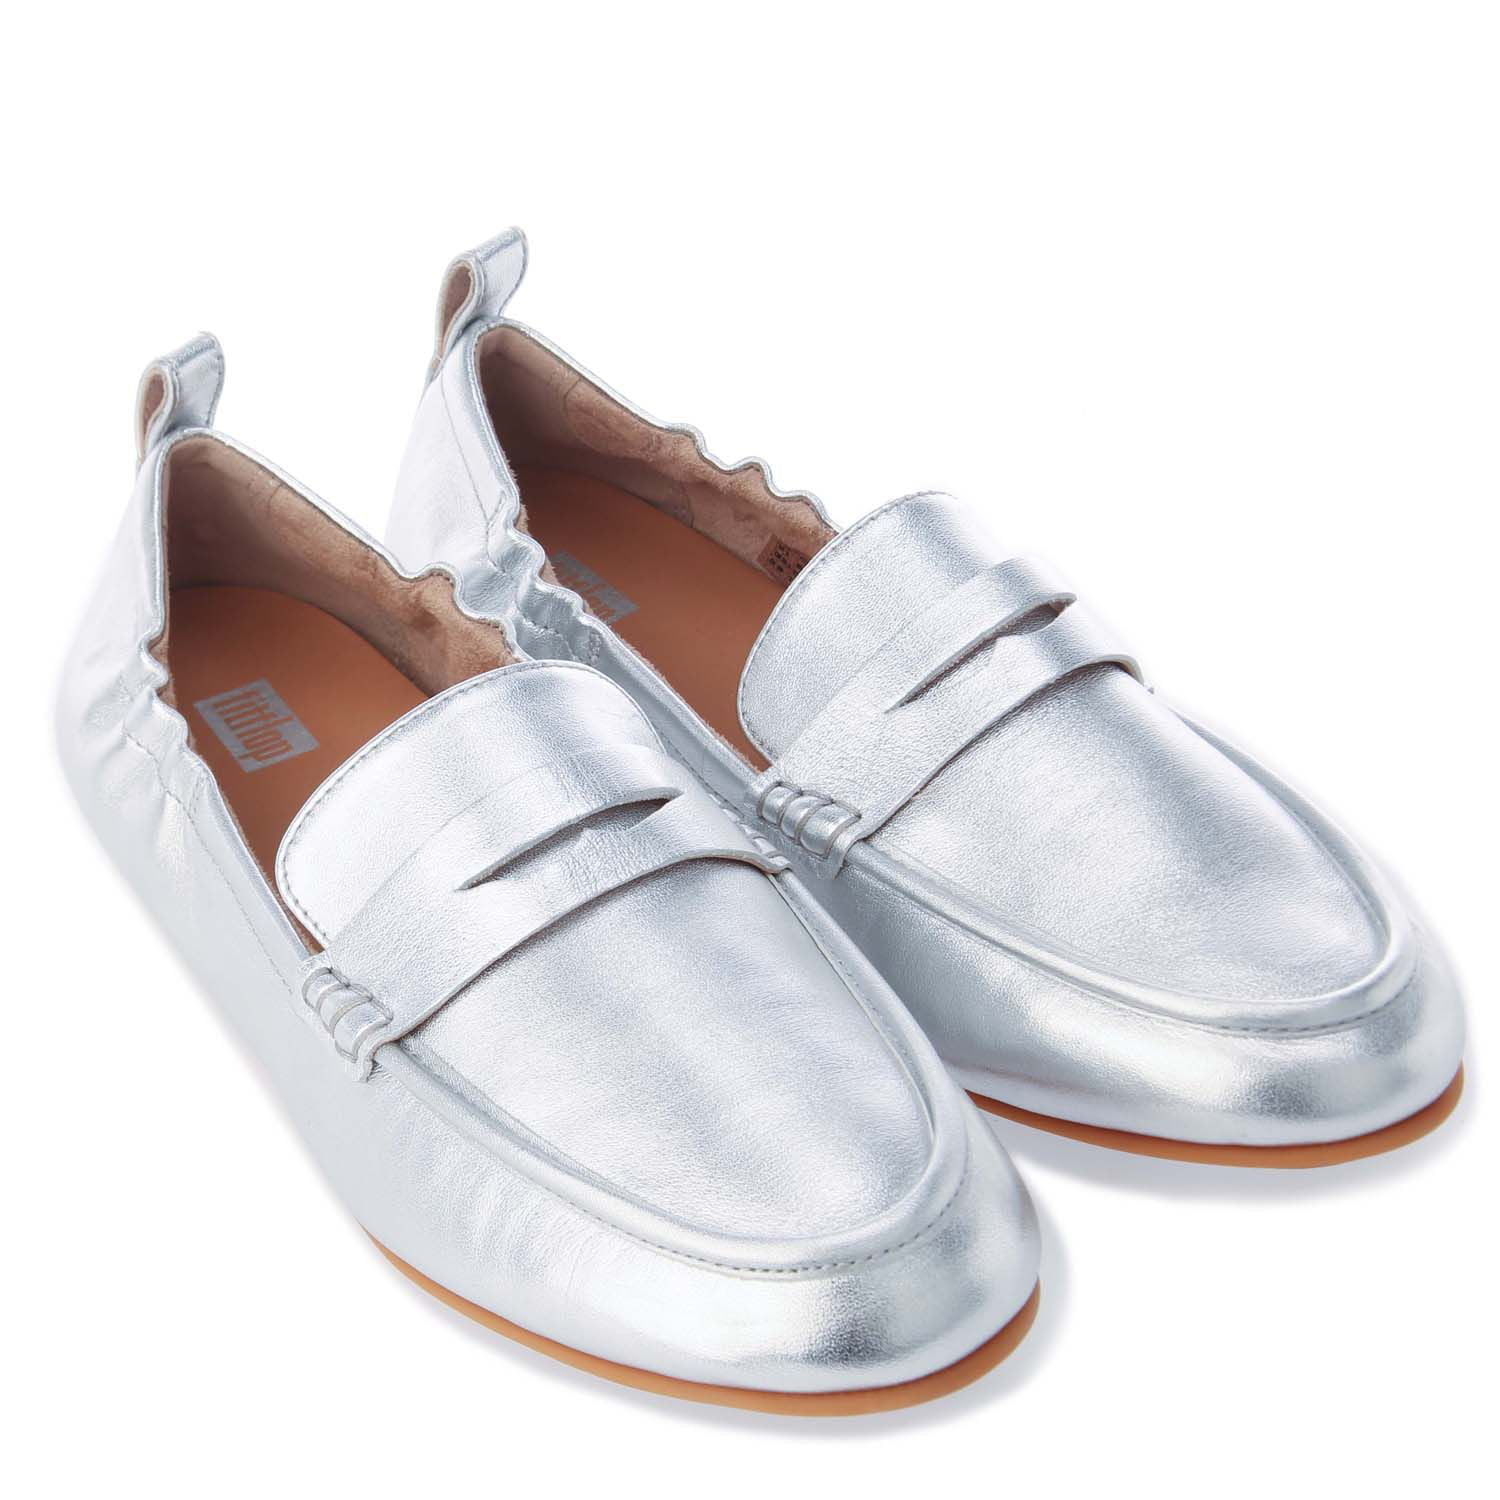 Women's Fit Flop Allegro Metallic Leather Penny Loafers Shoes in - Walmart.com